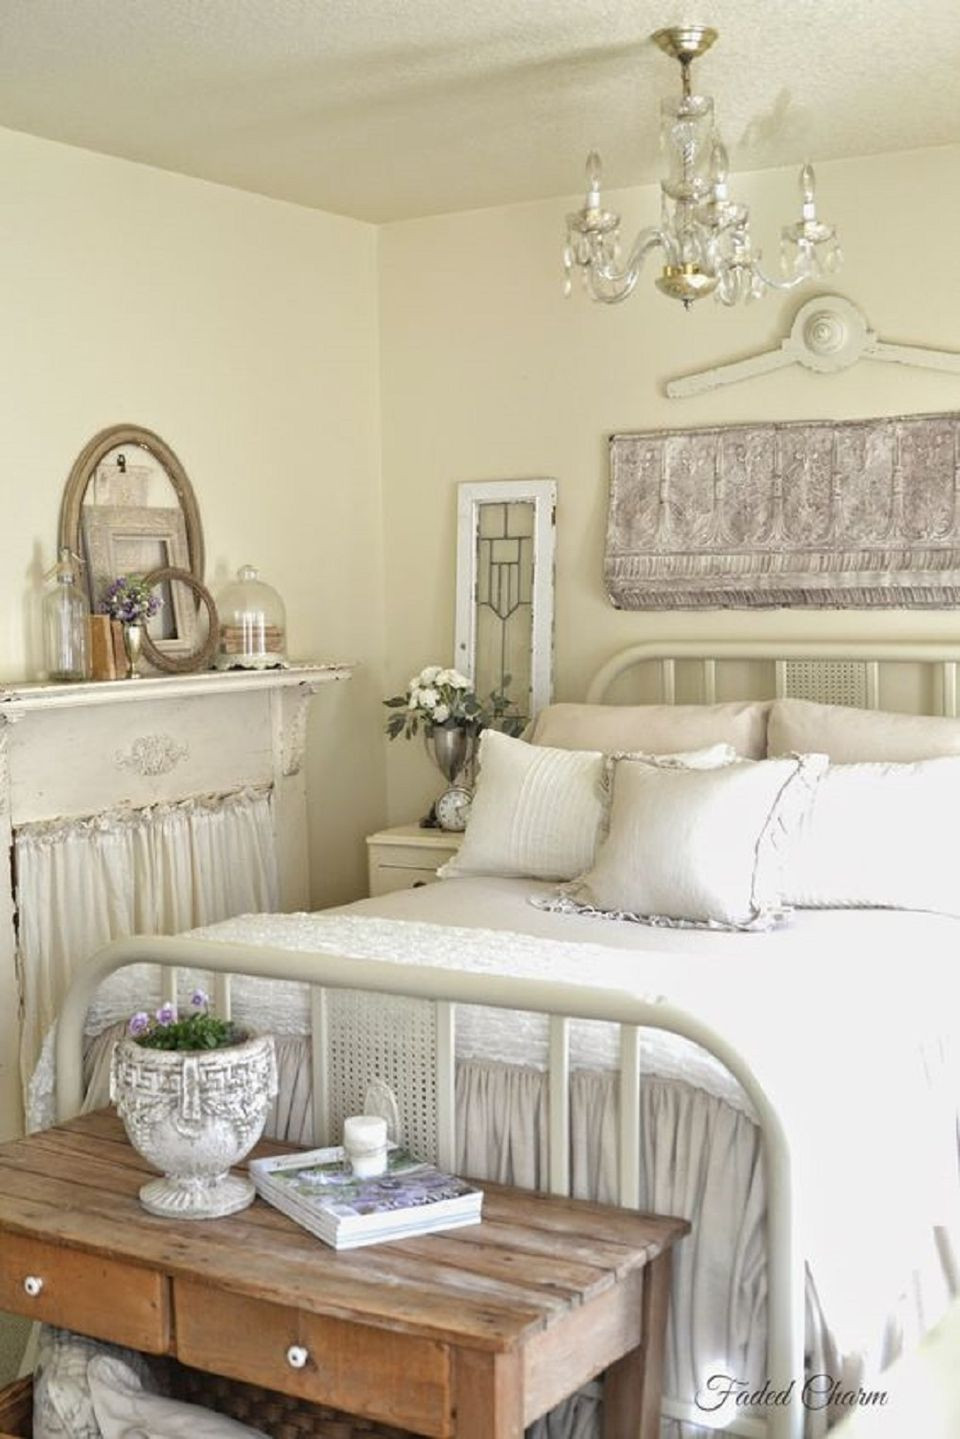 French Shabby Chic Bedroom Ideas
 French Country Bedroom Decorating Ideas and s